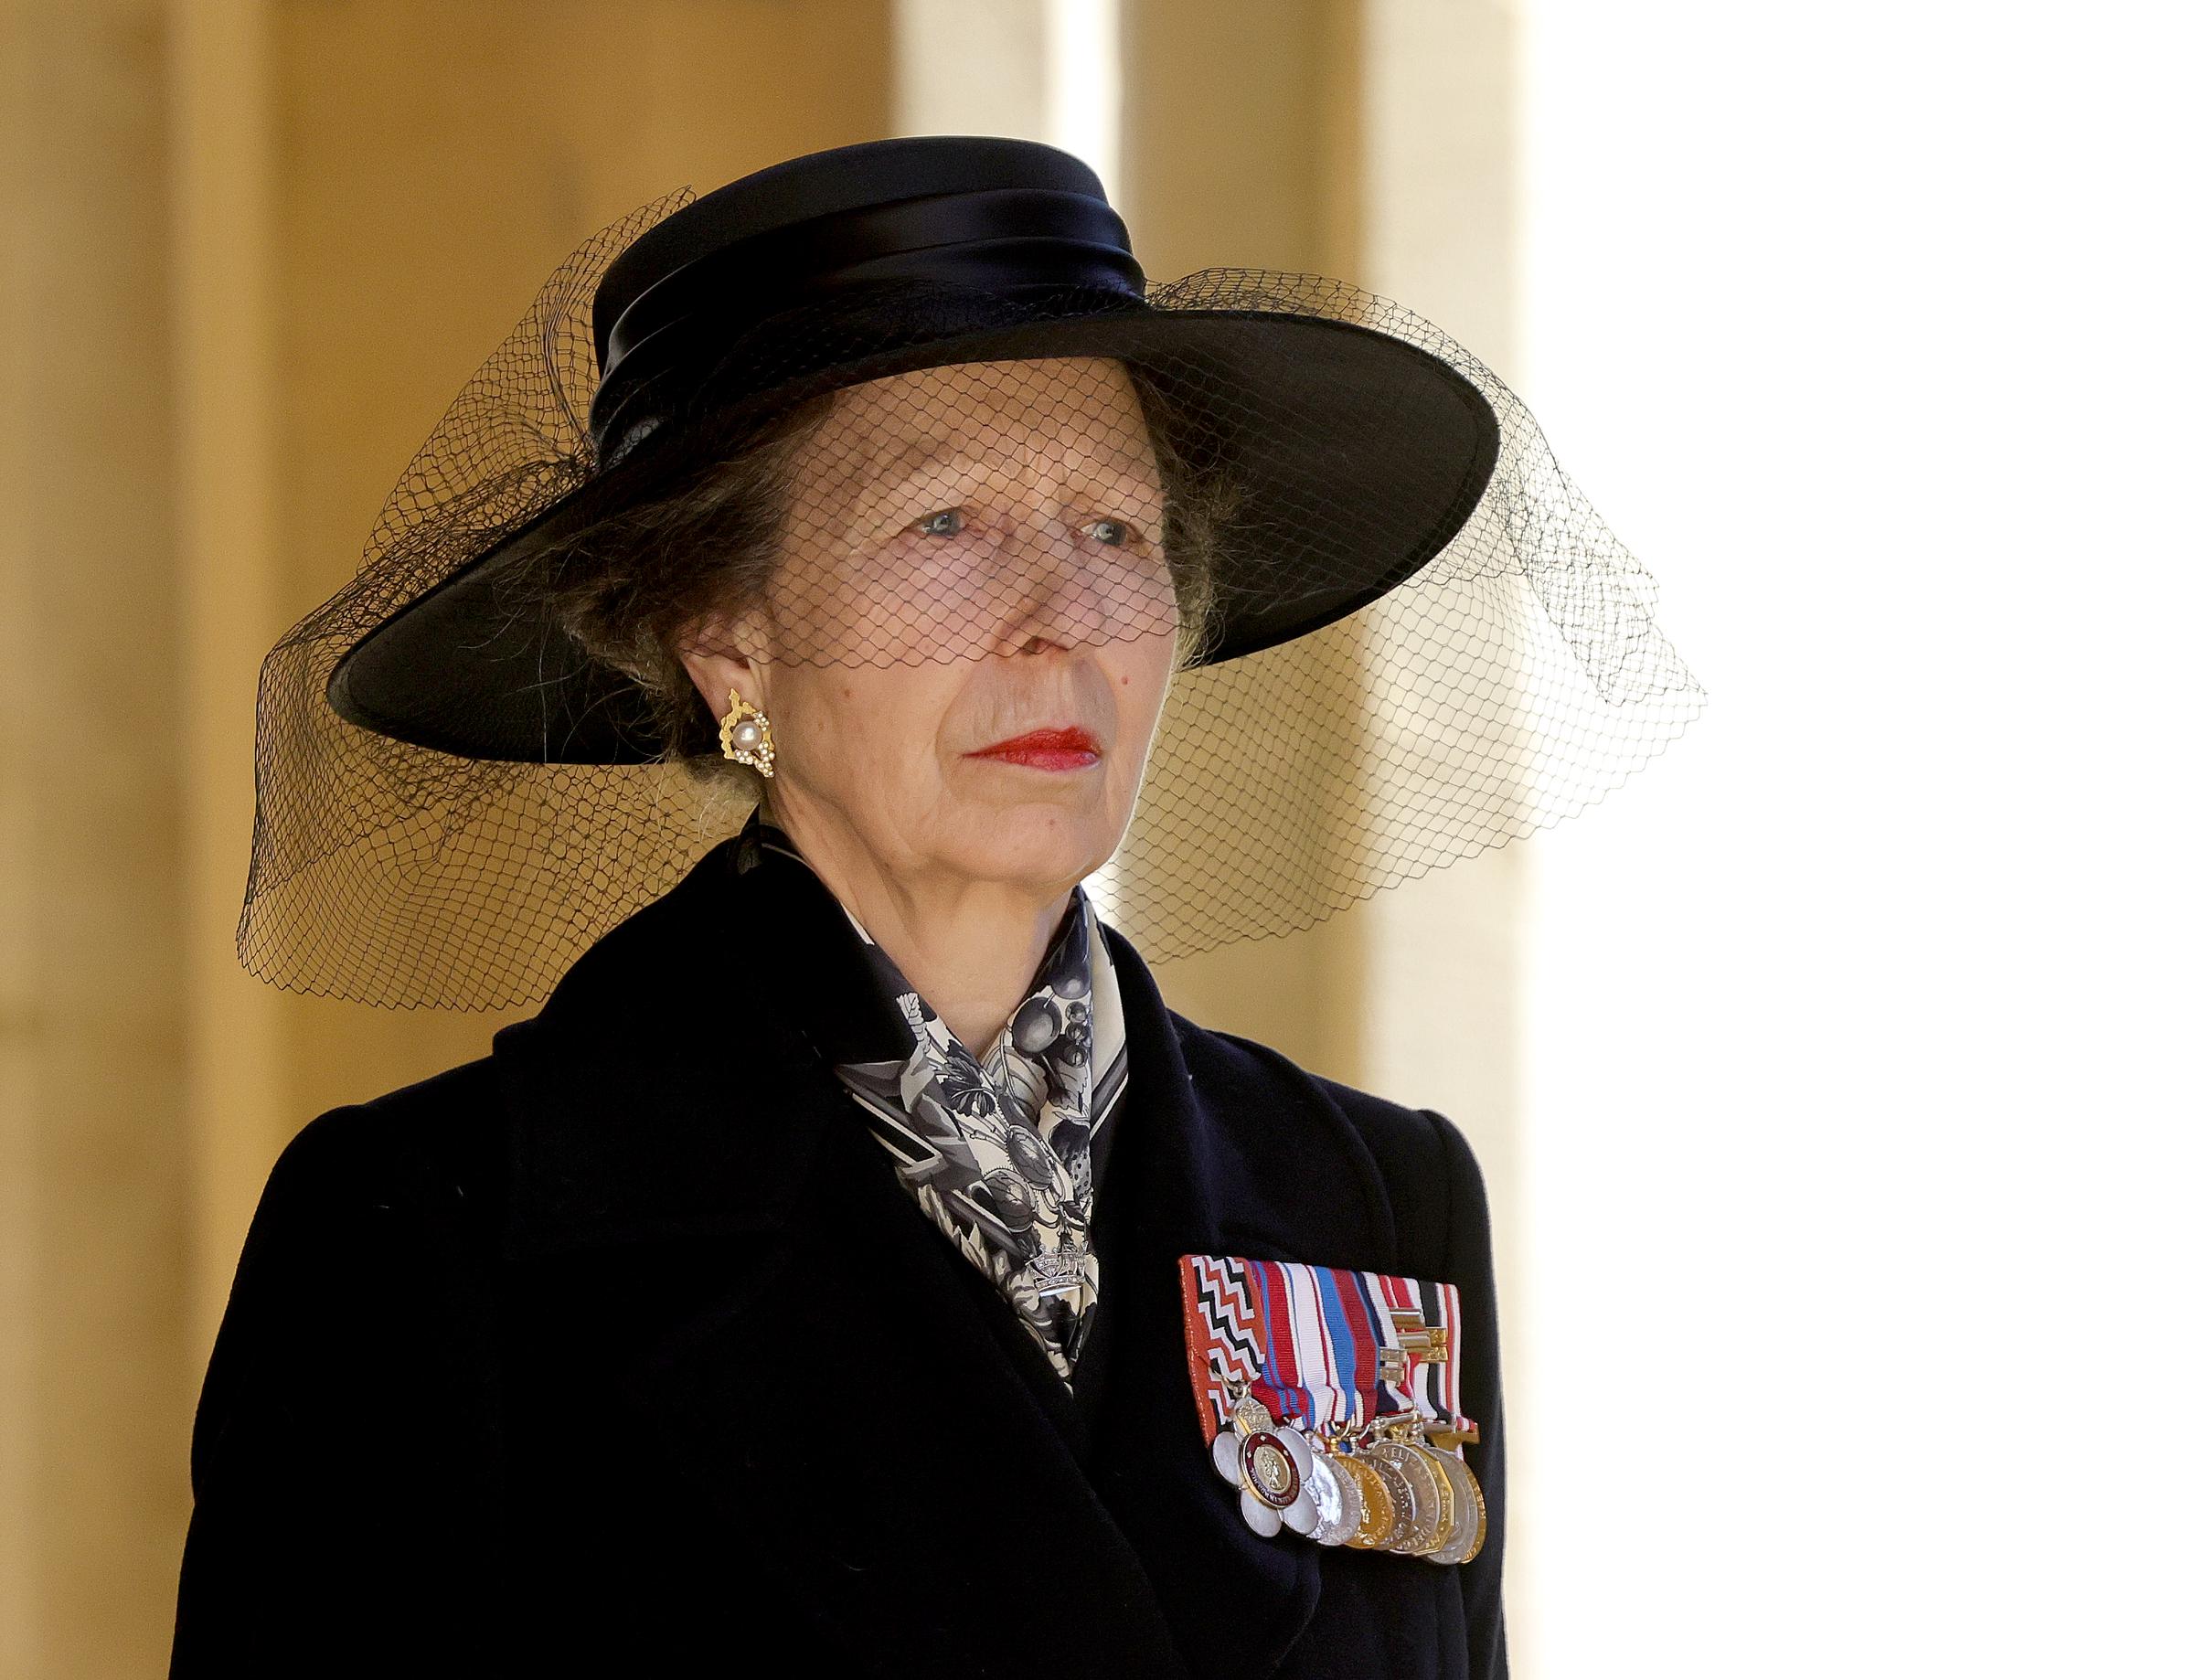 Princess Anne during the funeral of Prince Philip, Duke of Edinburgh at Windsor Castle on April 17, 2021 | Source: Getty Images